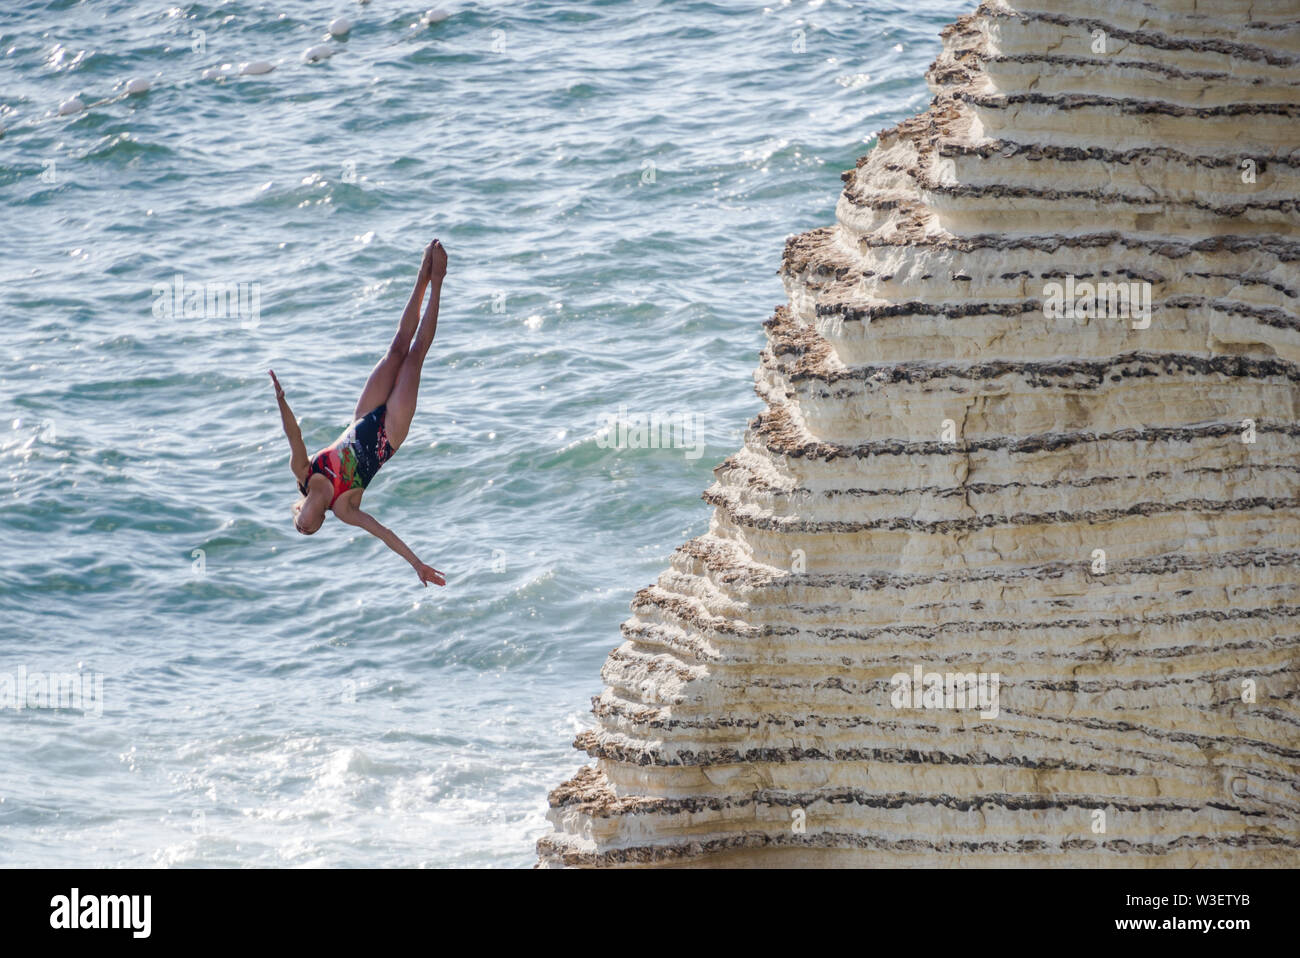 Competitors jump from Rauche Rocks, Beirut, launching from heights of up to 27m, for the Red Bull cliff diving world series 2019 Stock Photo